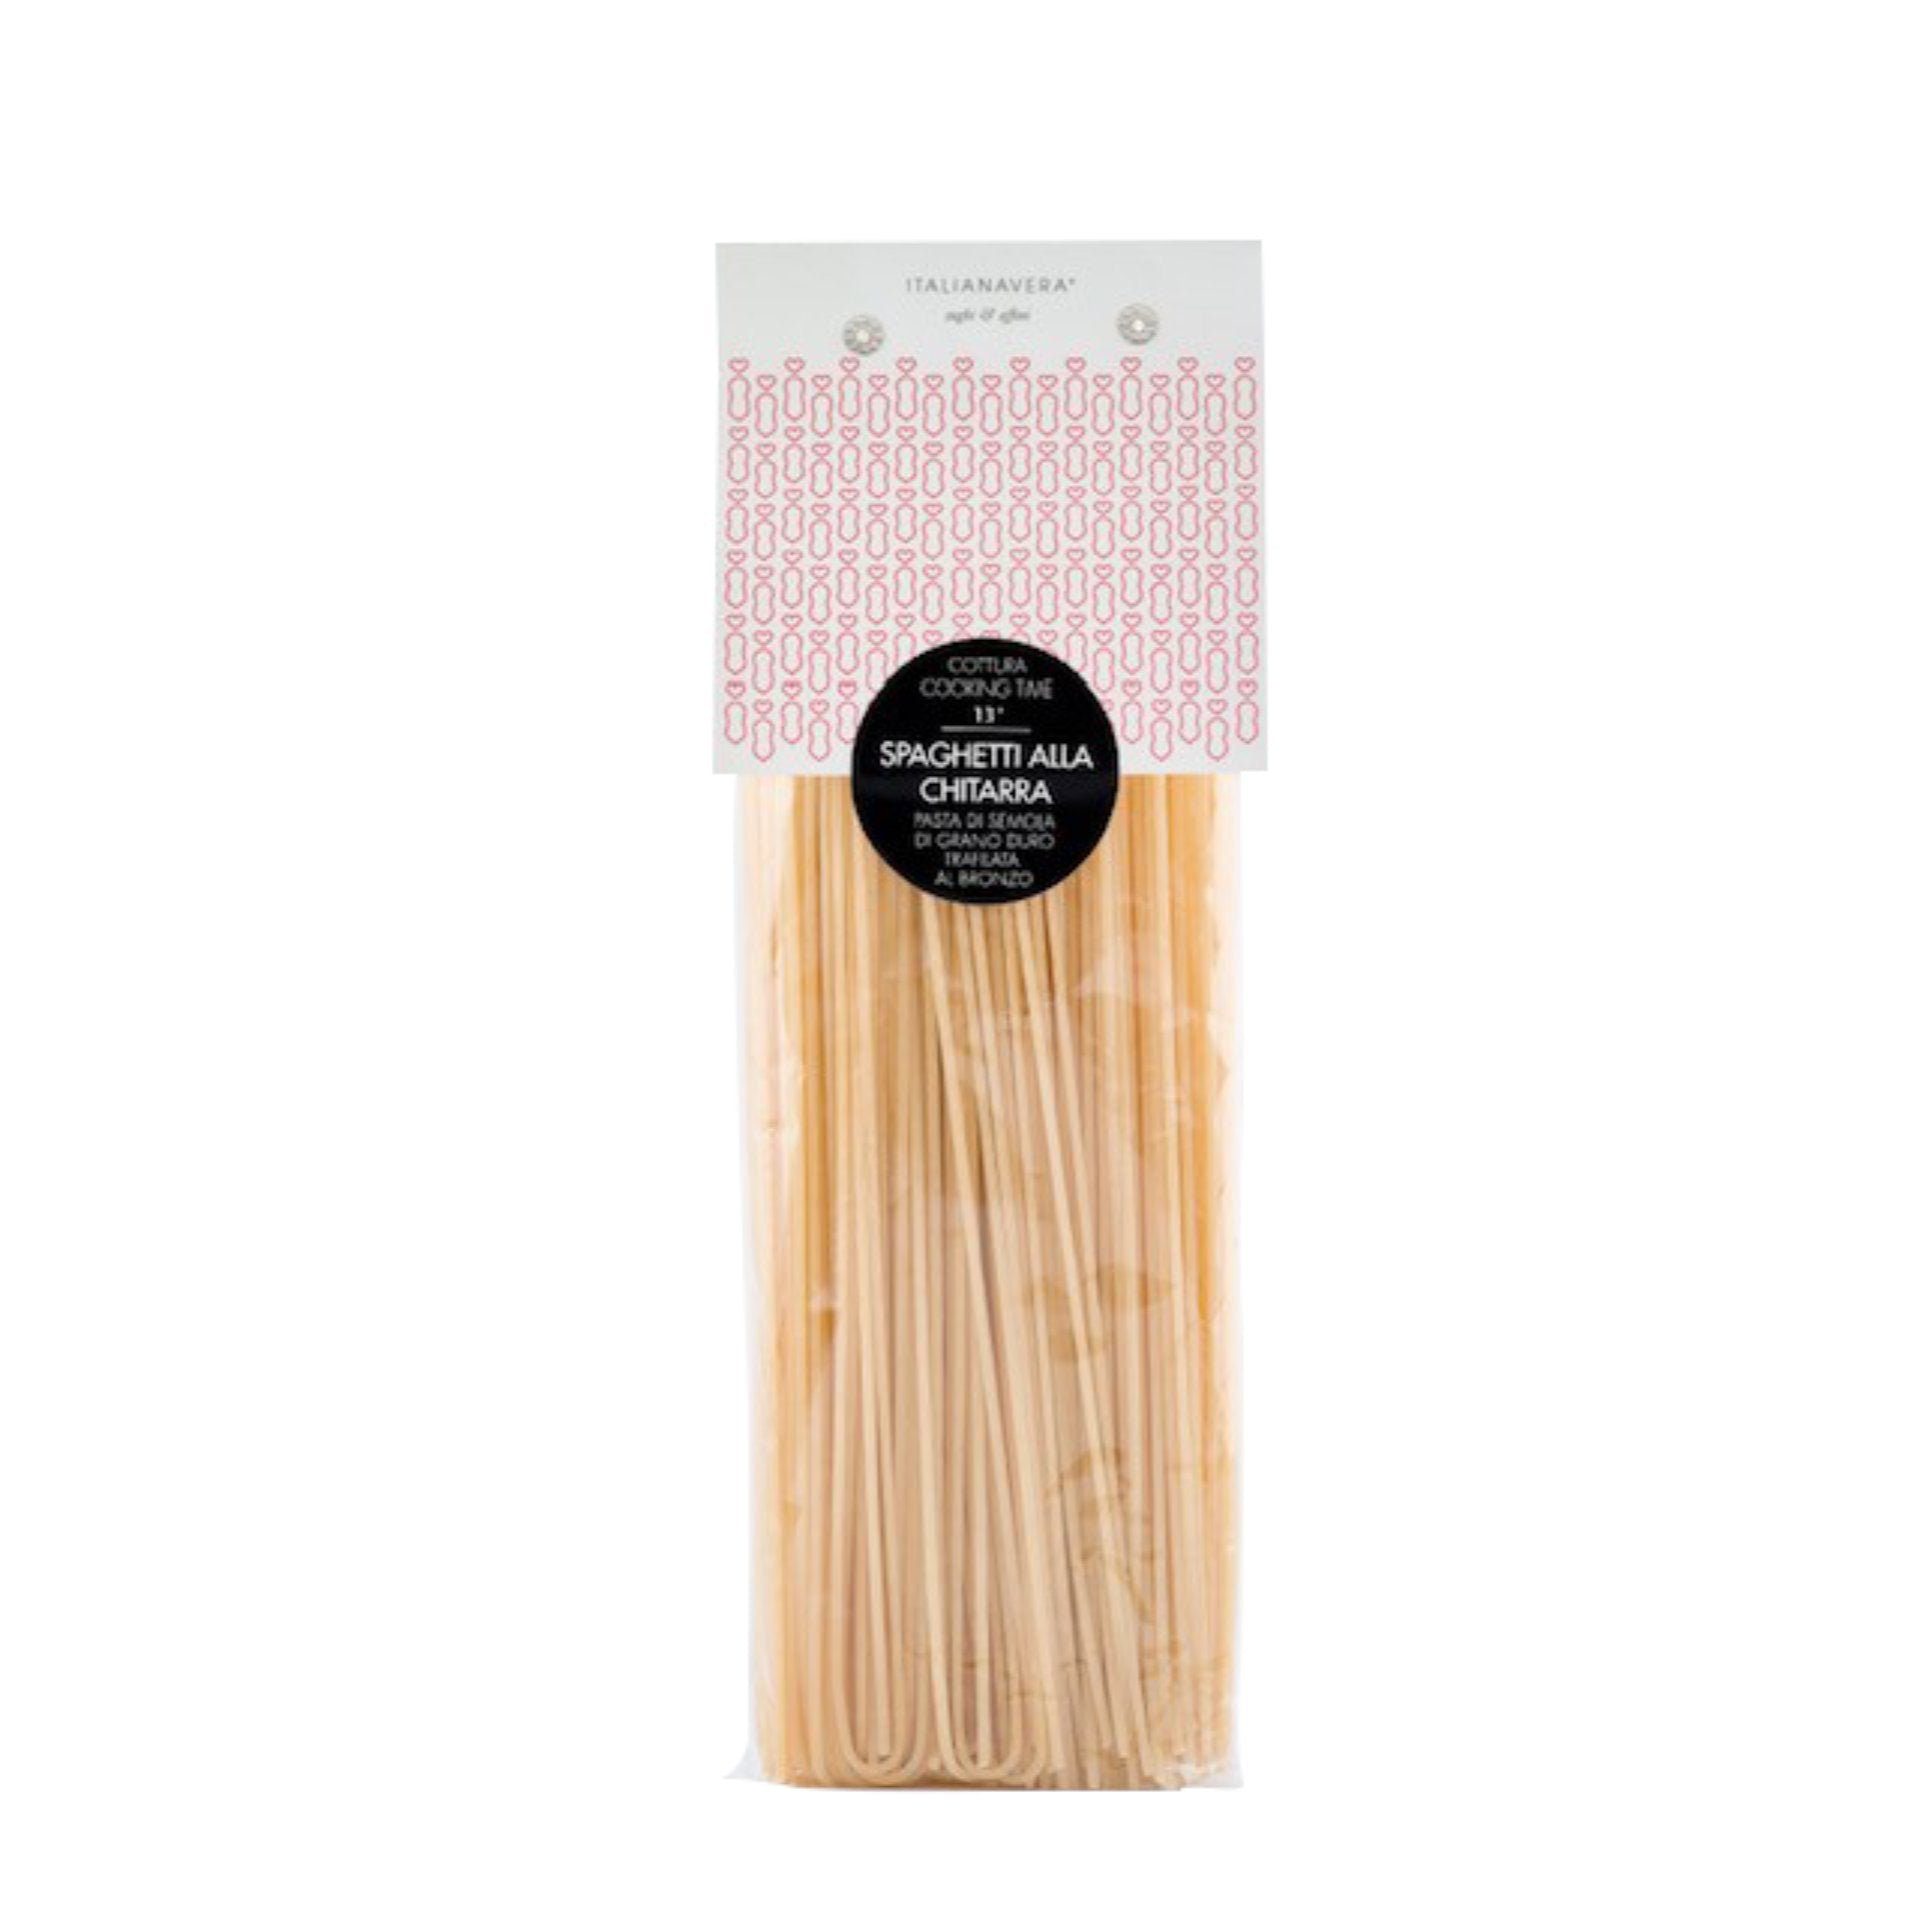 Italianavera Spaghetti alla Chitarra 500g  | Imported and distributed in the UK by Just Gourmet Foods